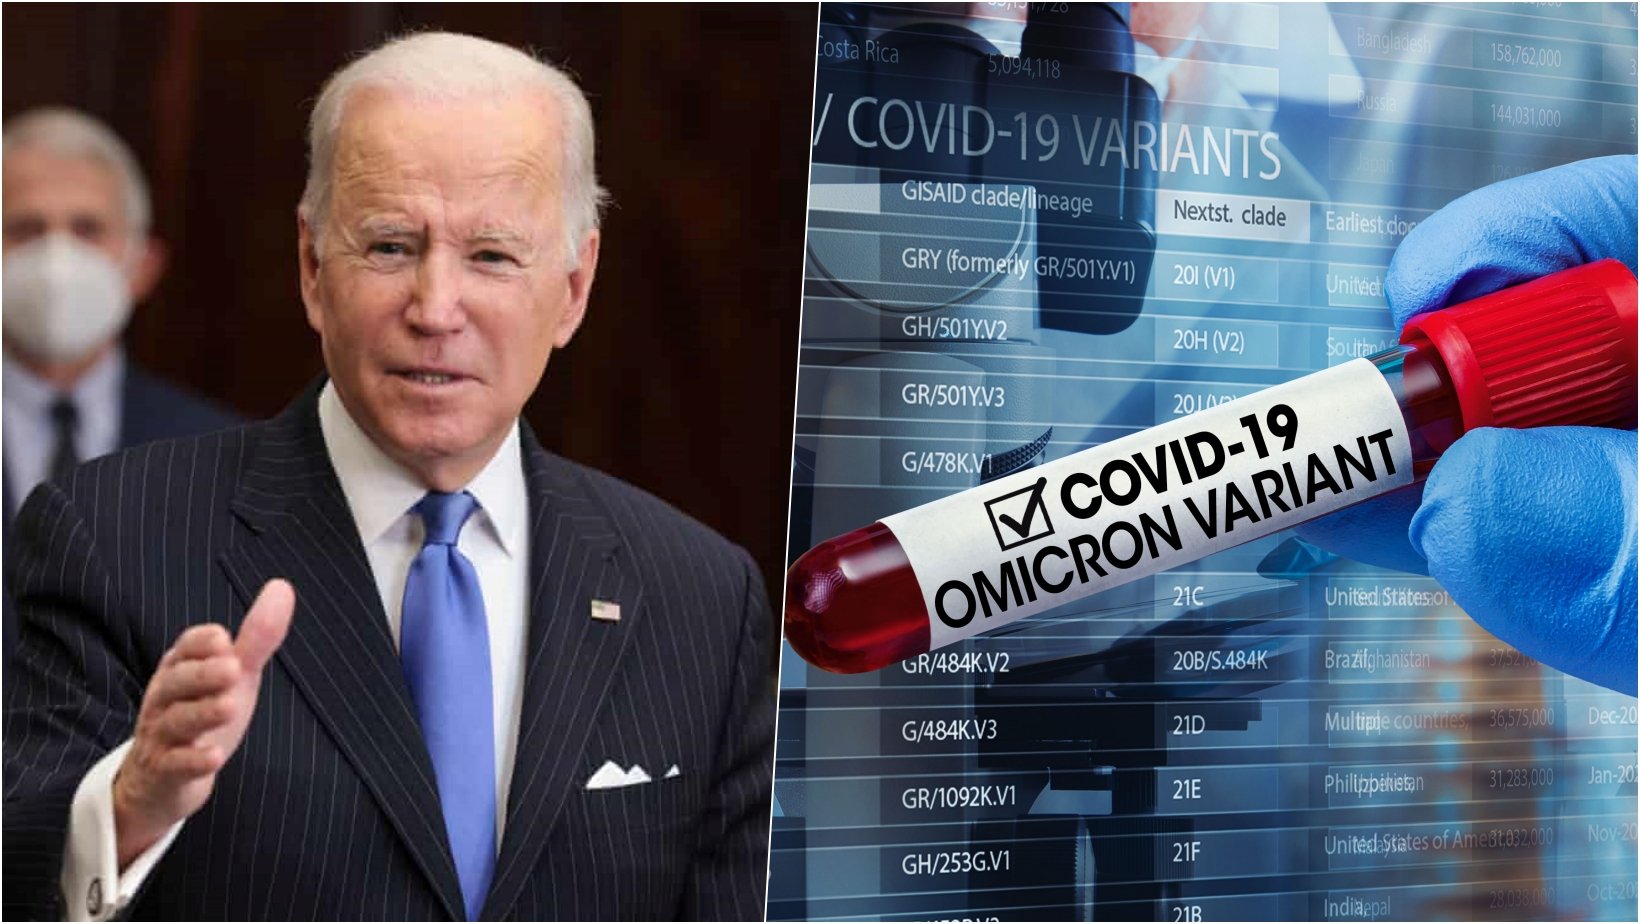 6 facebook cover 23.jpg?resize=1200,630 - President Joe Biden Advices Not To PANIC Over Omicron Variant Claiming There Is No Need For Lockdown